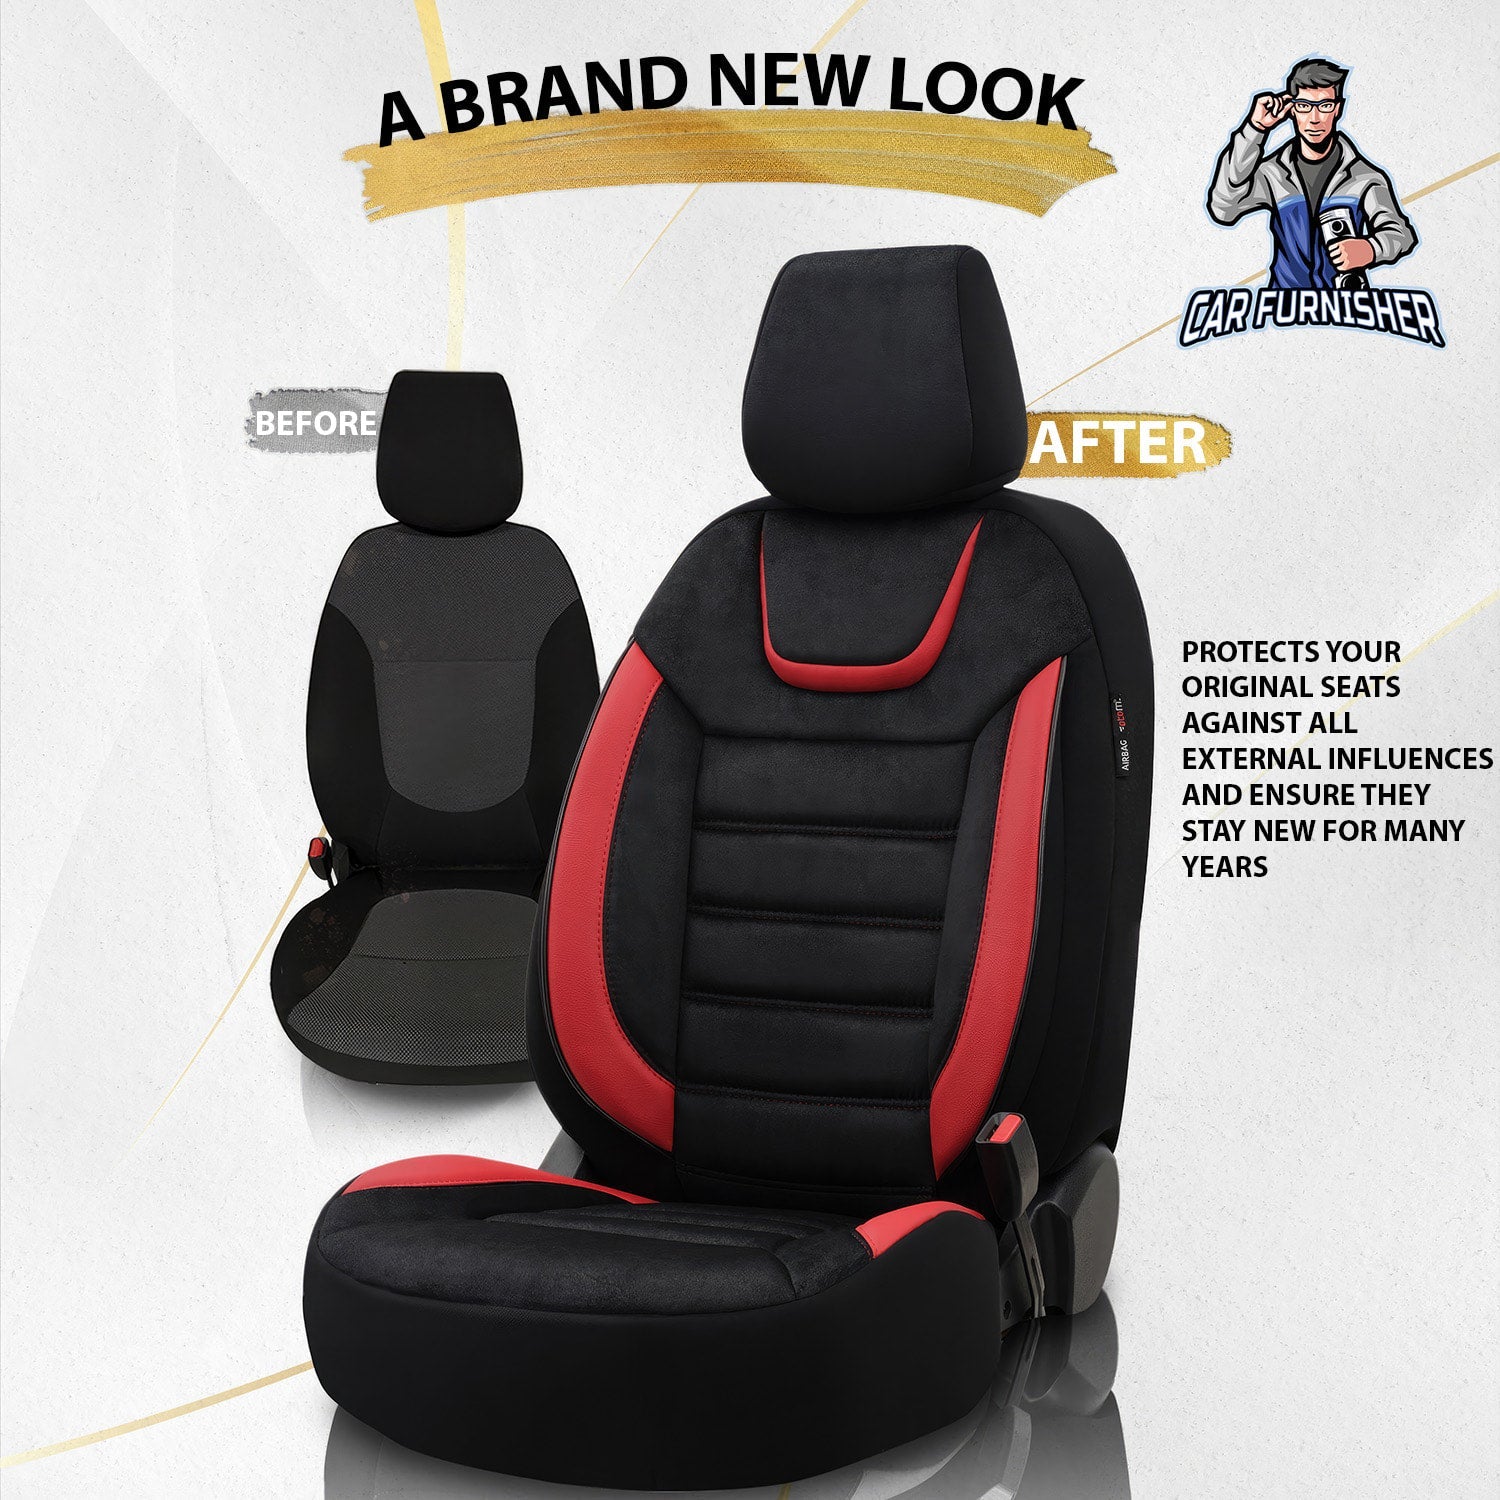 Mercedes 190 Seat Covers Extra Support Iconic Design Red 5 Seats + Headrests (Full Set) Leather & Lacoste Fabric